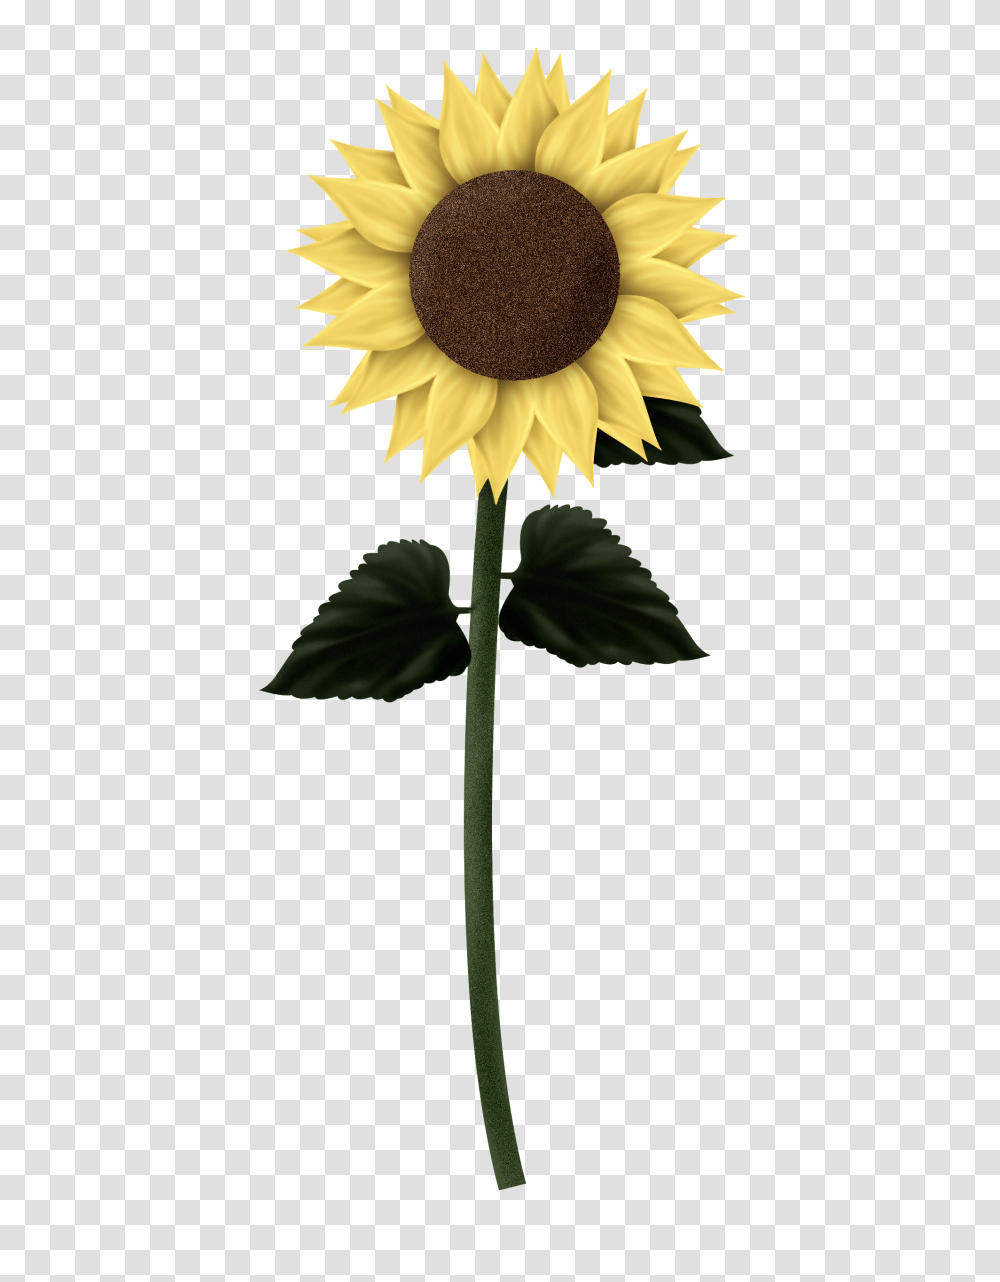 Sunflower Clipart Tall Sunflower Gif Background, Plant, Blossom Transparent Png